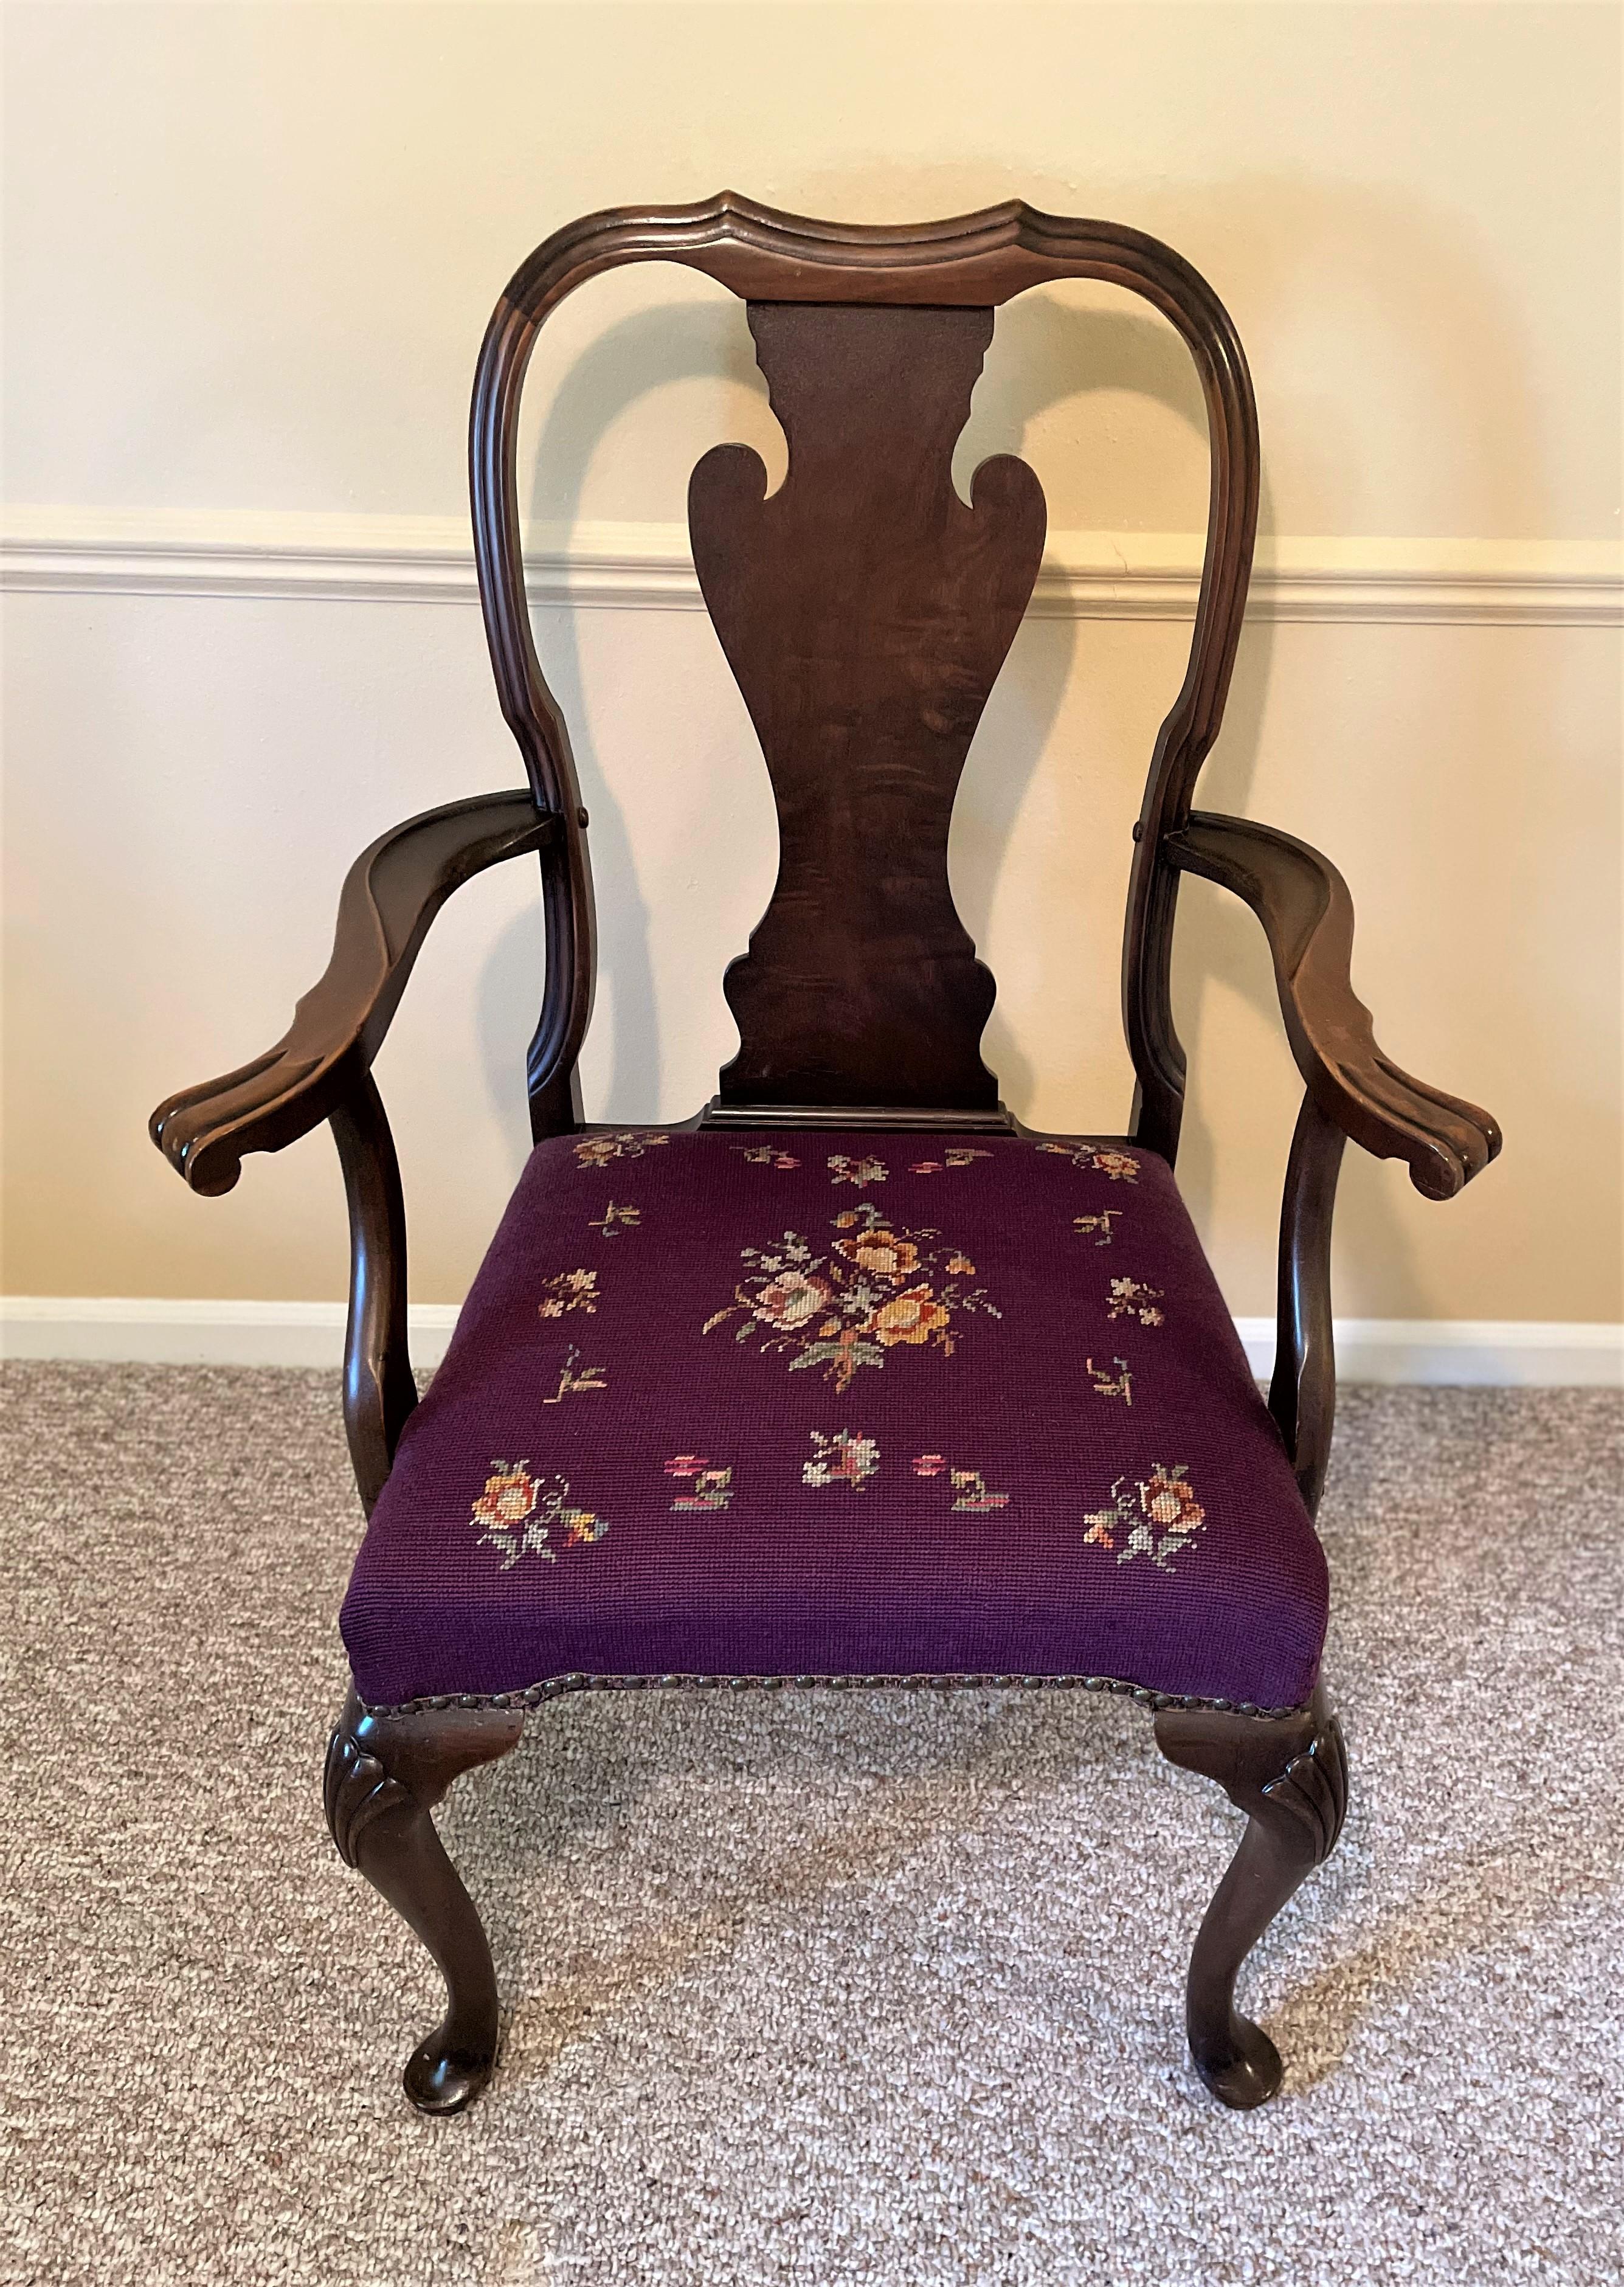 Here is a spectacular solid walnut Queen Anne-style dining or accent chair from the 1930s. It is in MINT condition, and well-weighted with excellent build quality. Like new!

The chair has graceful, elegant proportions overall. The seat cushion is